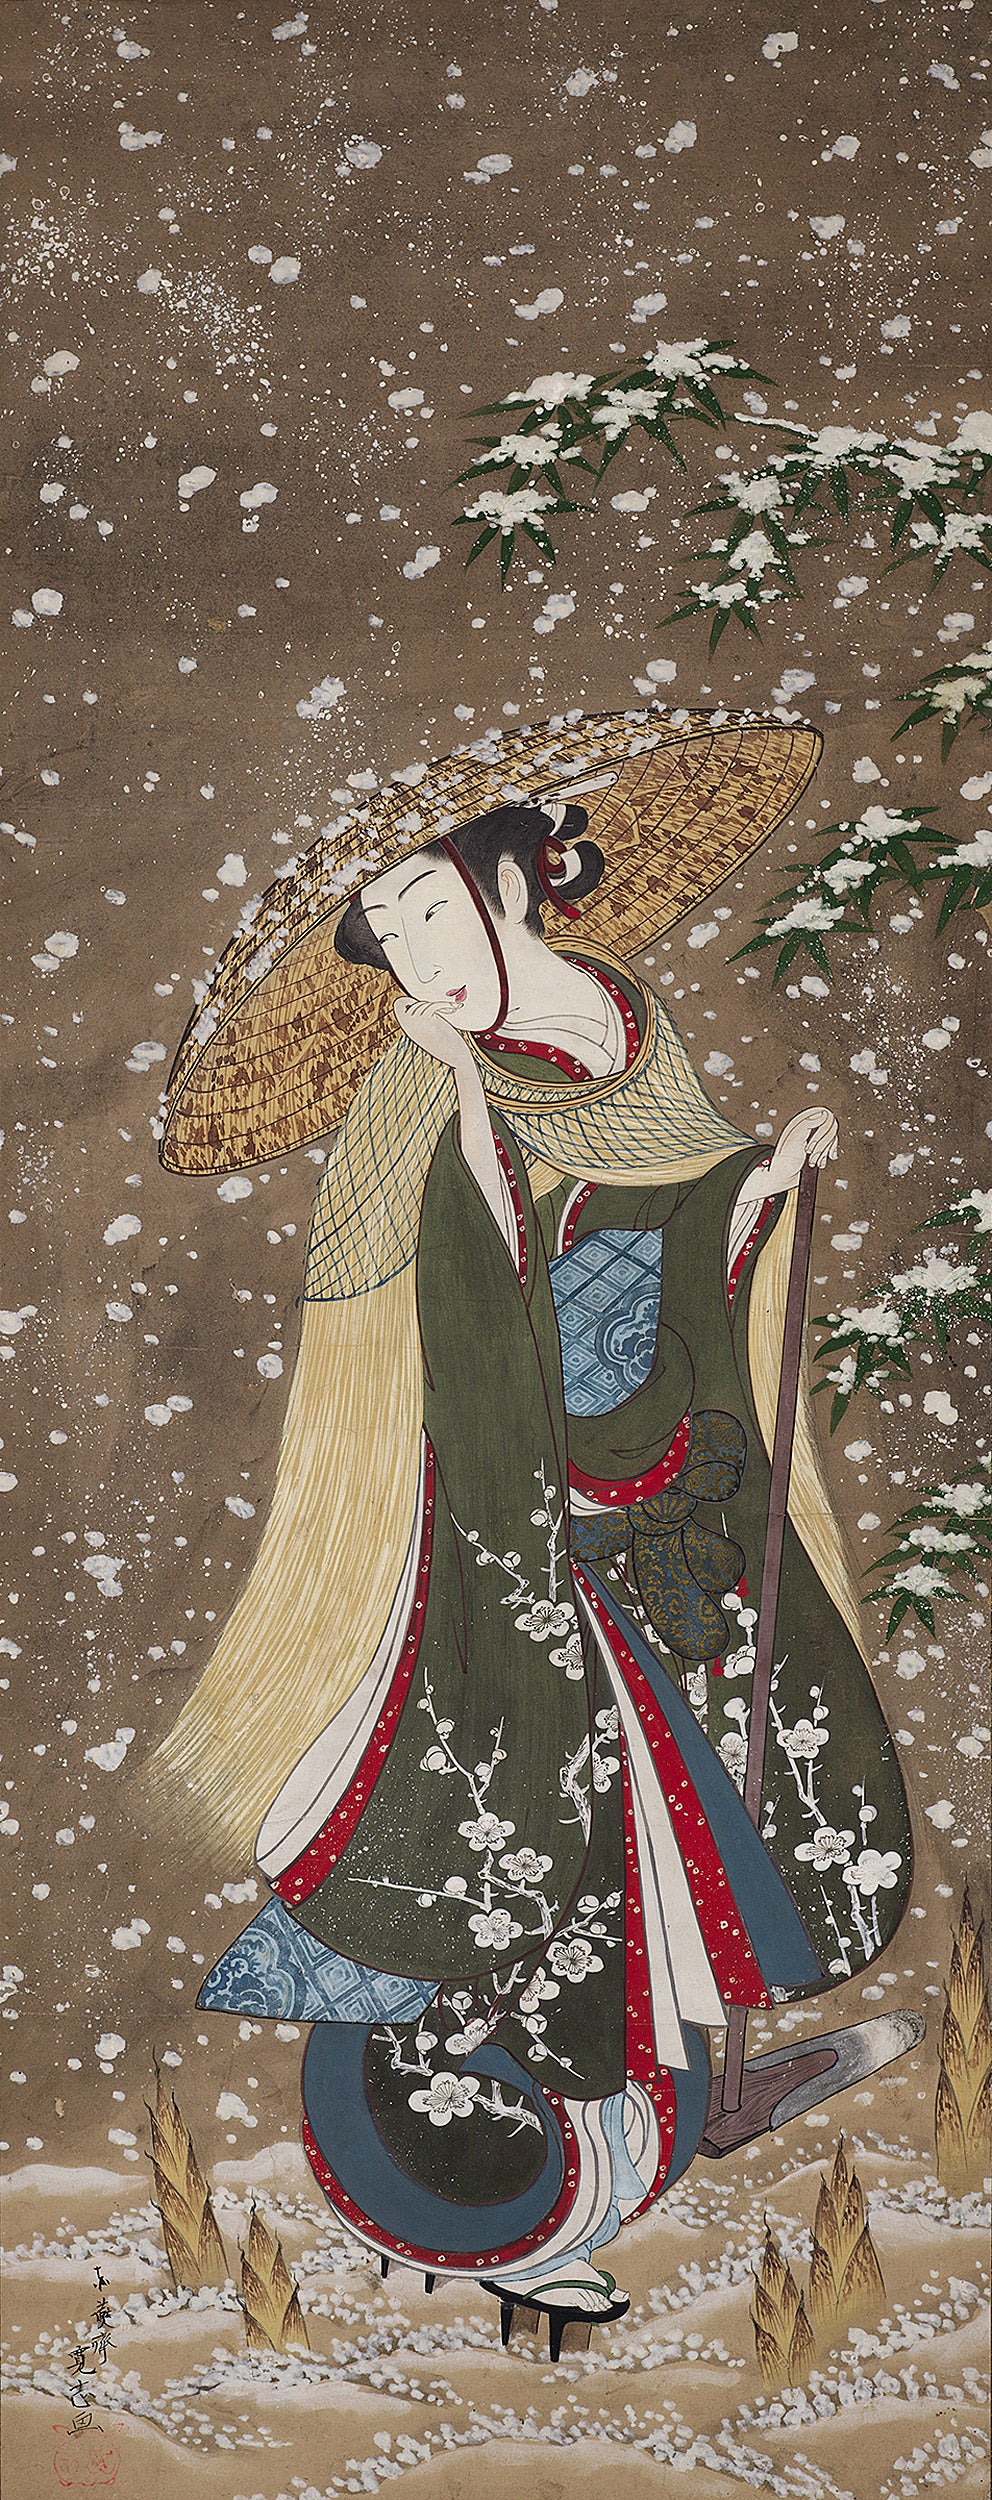 Scroll depicts woman in hat walking through snow with bamboo shoots pushing up through the ground.